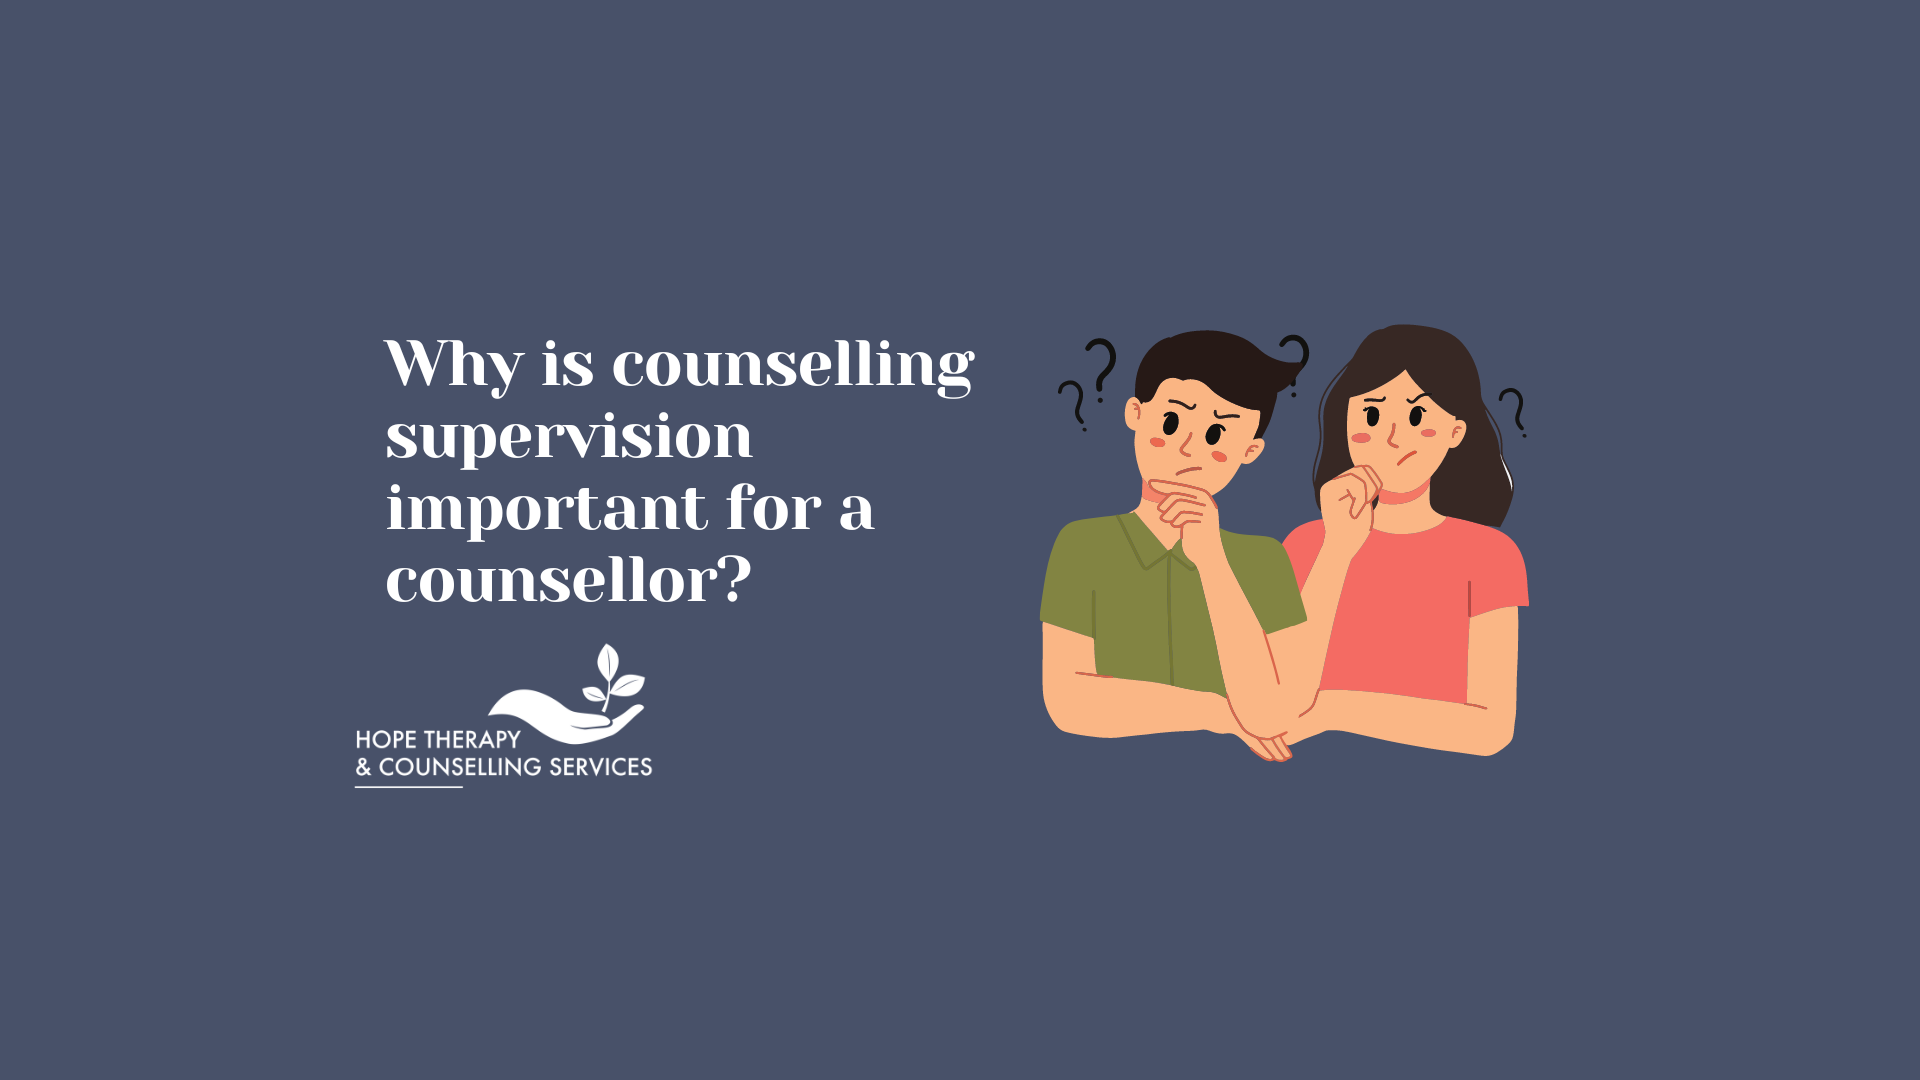 Why is counselling supervision important for a counsellor?